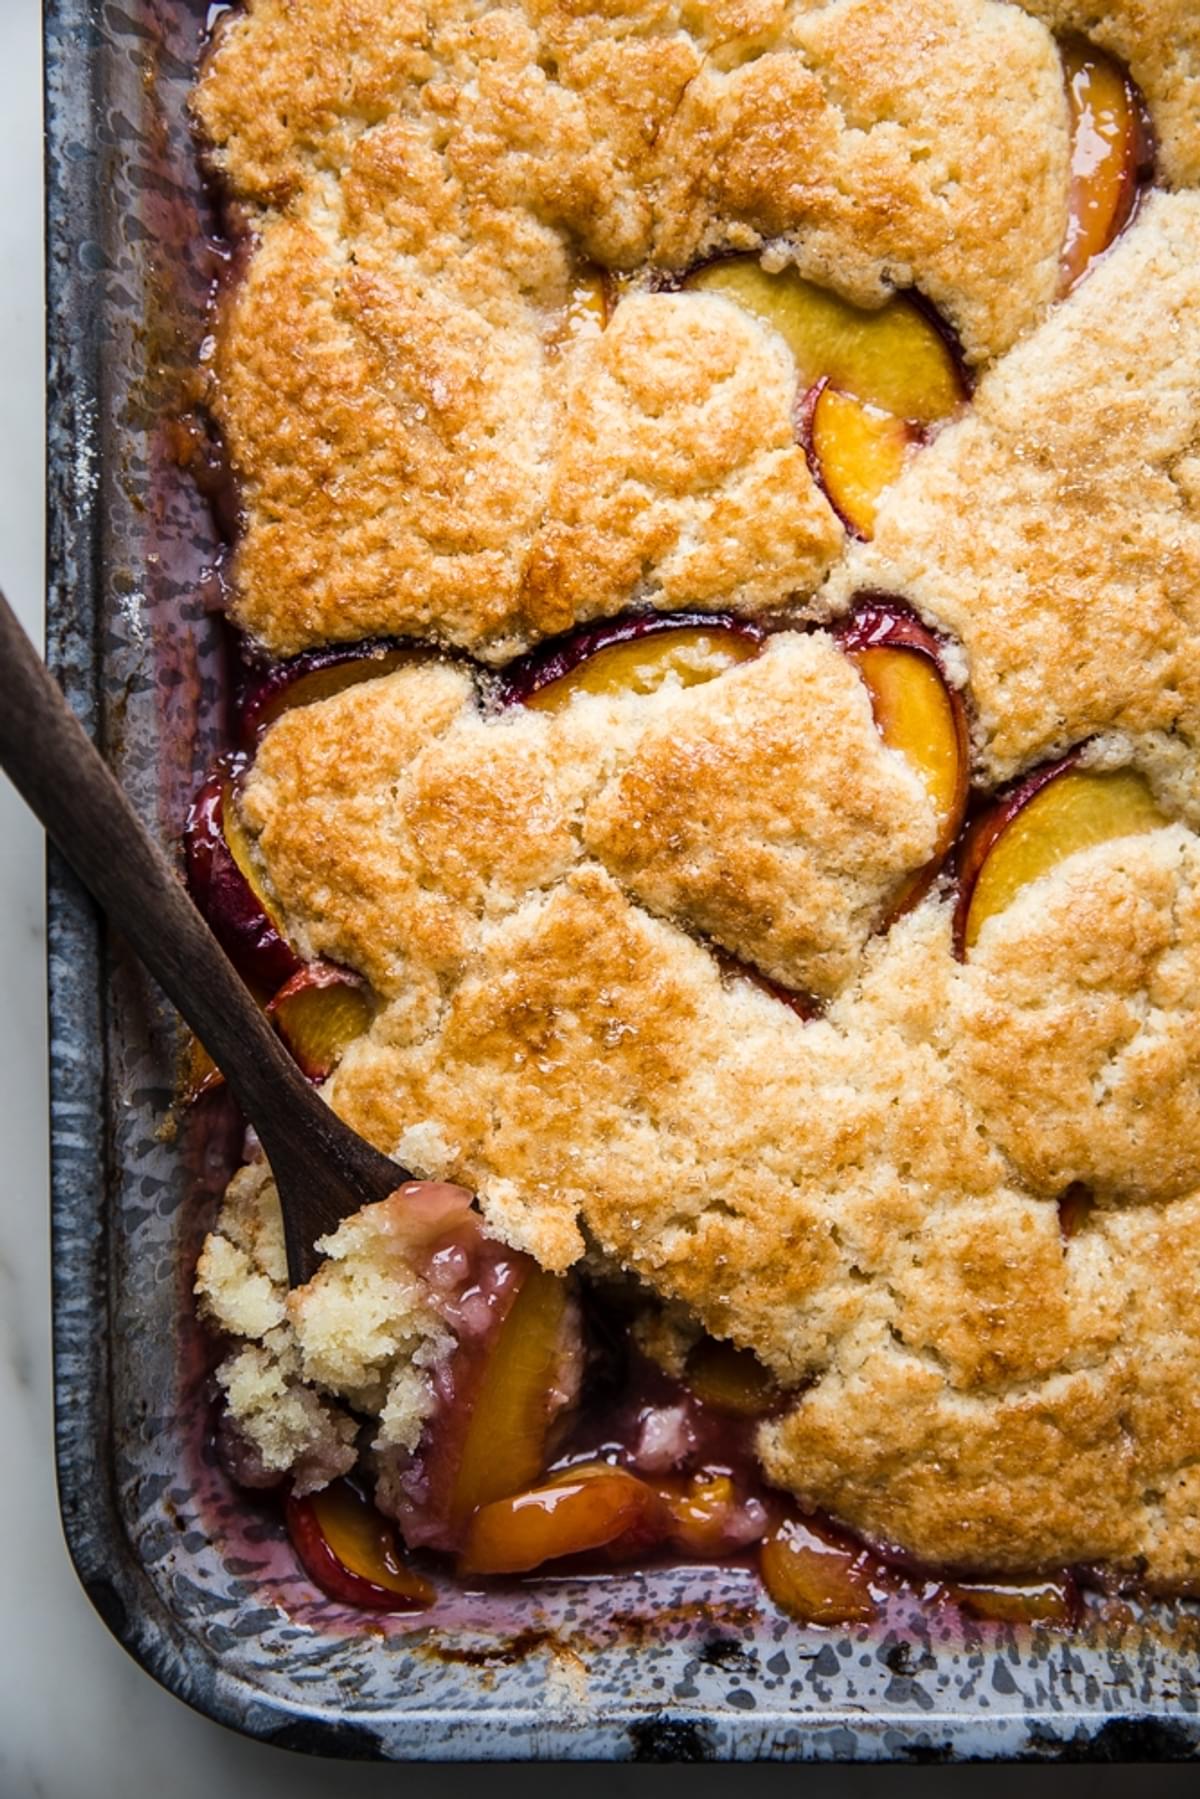 freshly baked peach cobbler in a baking dish with a spoon.